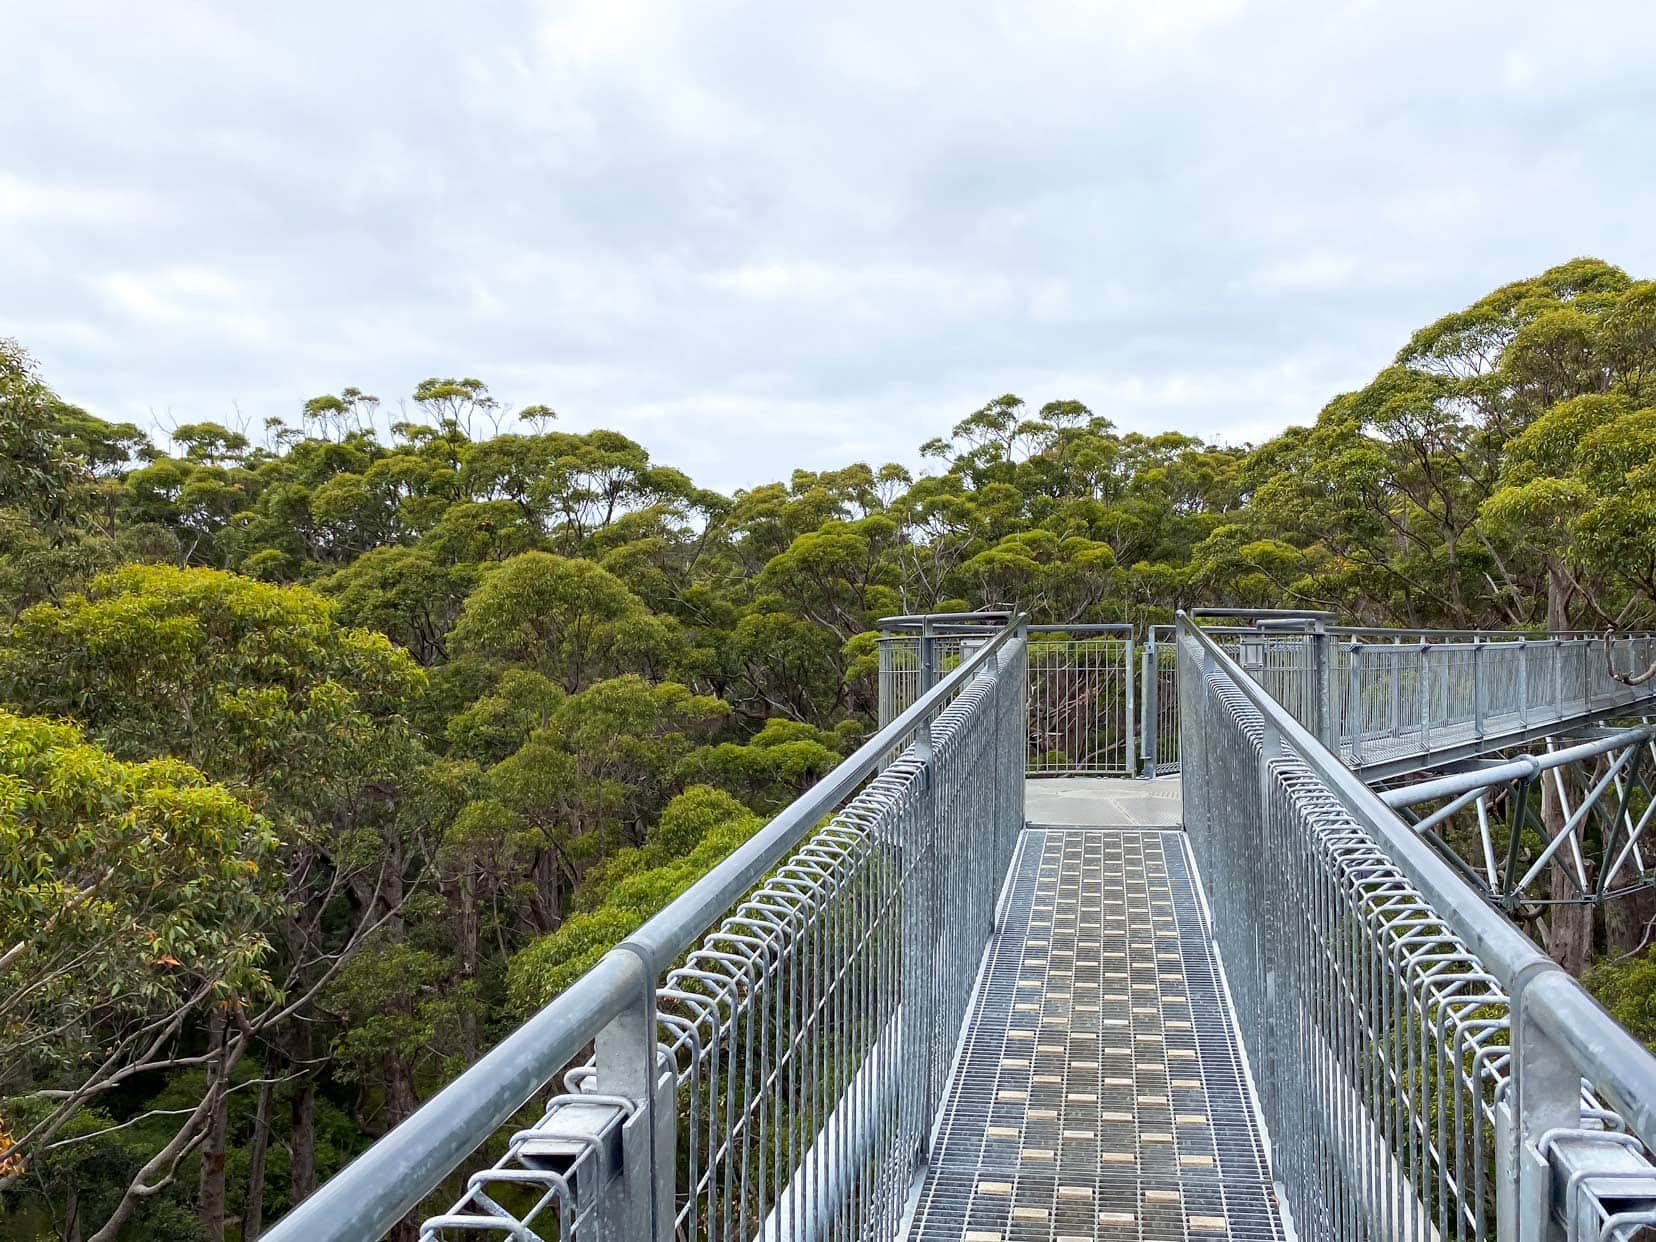 The tree top walkway with views of the tree tops and bridge gridded floor